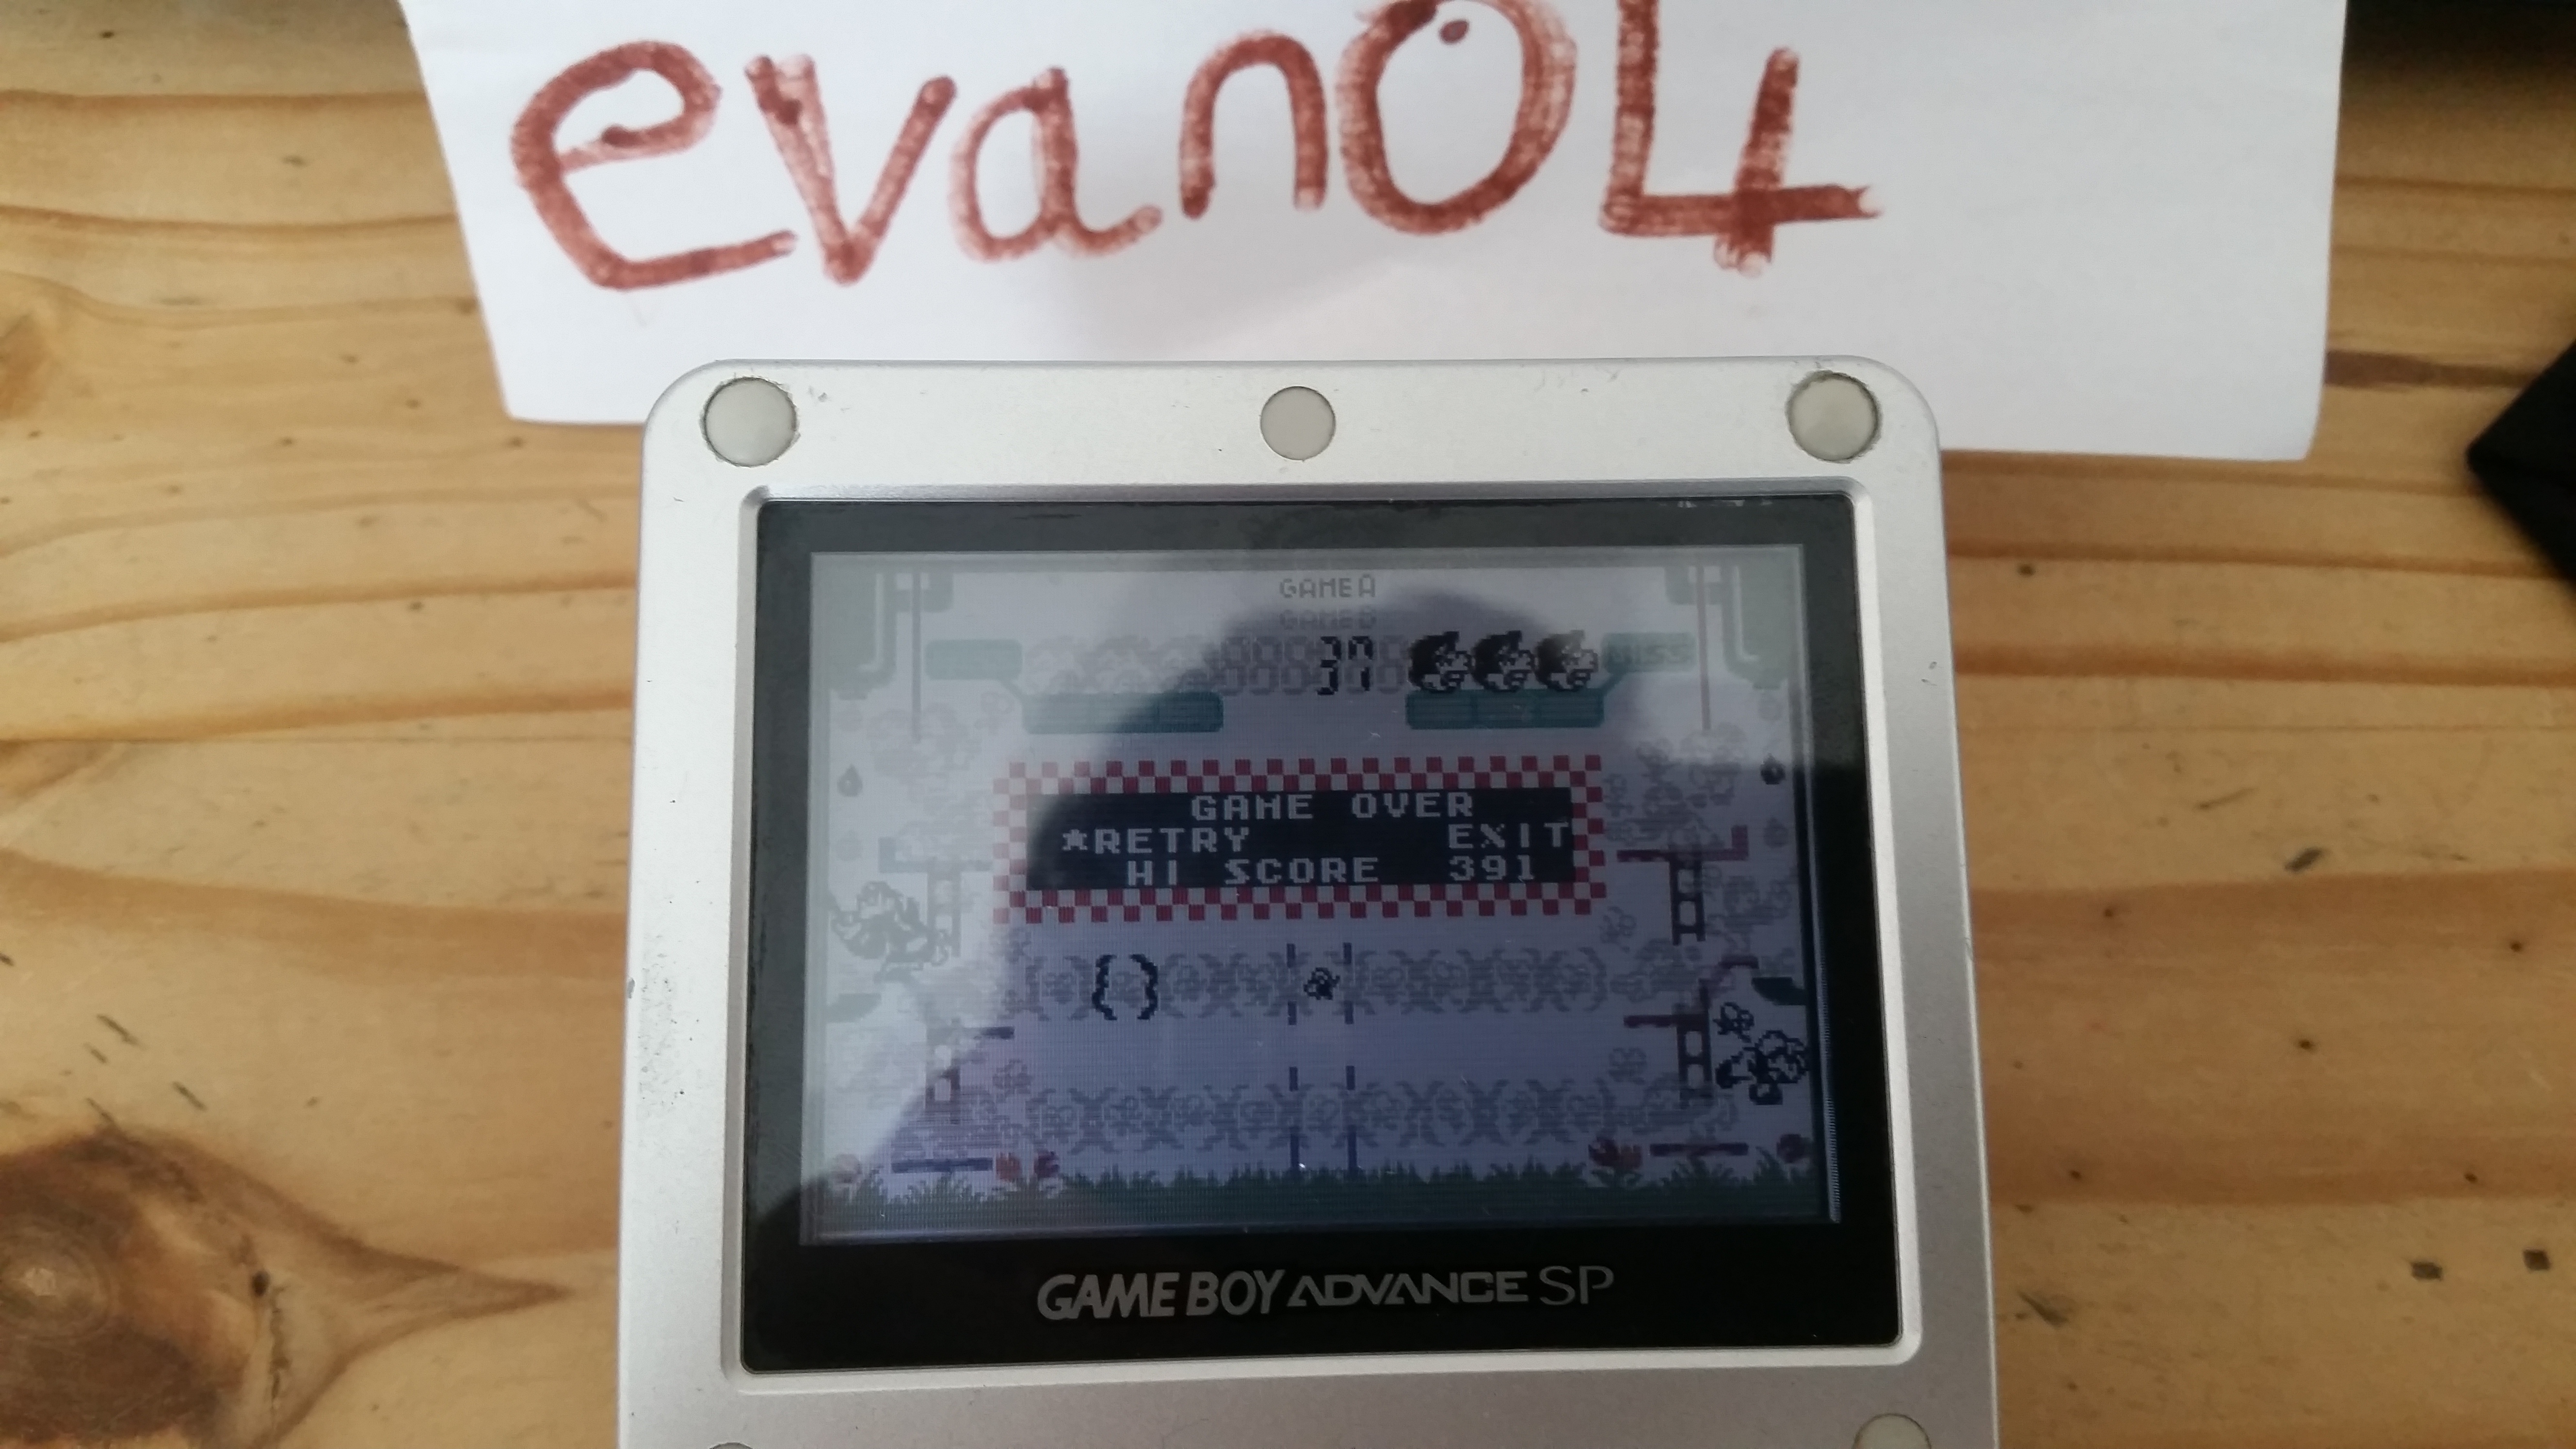 evan04: Game & Watch Gallery 4: Donkey Kong 3 [Classic: Game A] (GBA) 37 points on 2019-07-25 06:03:13